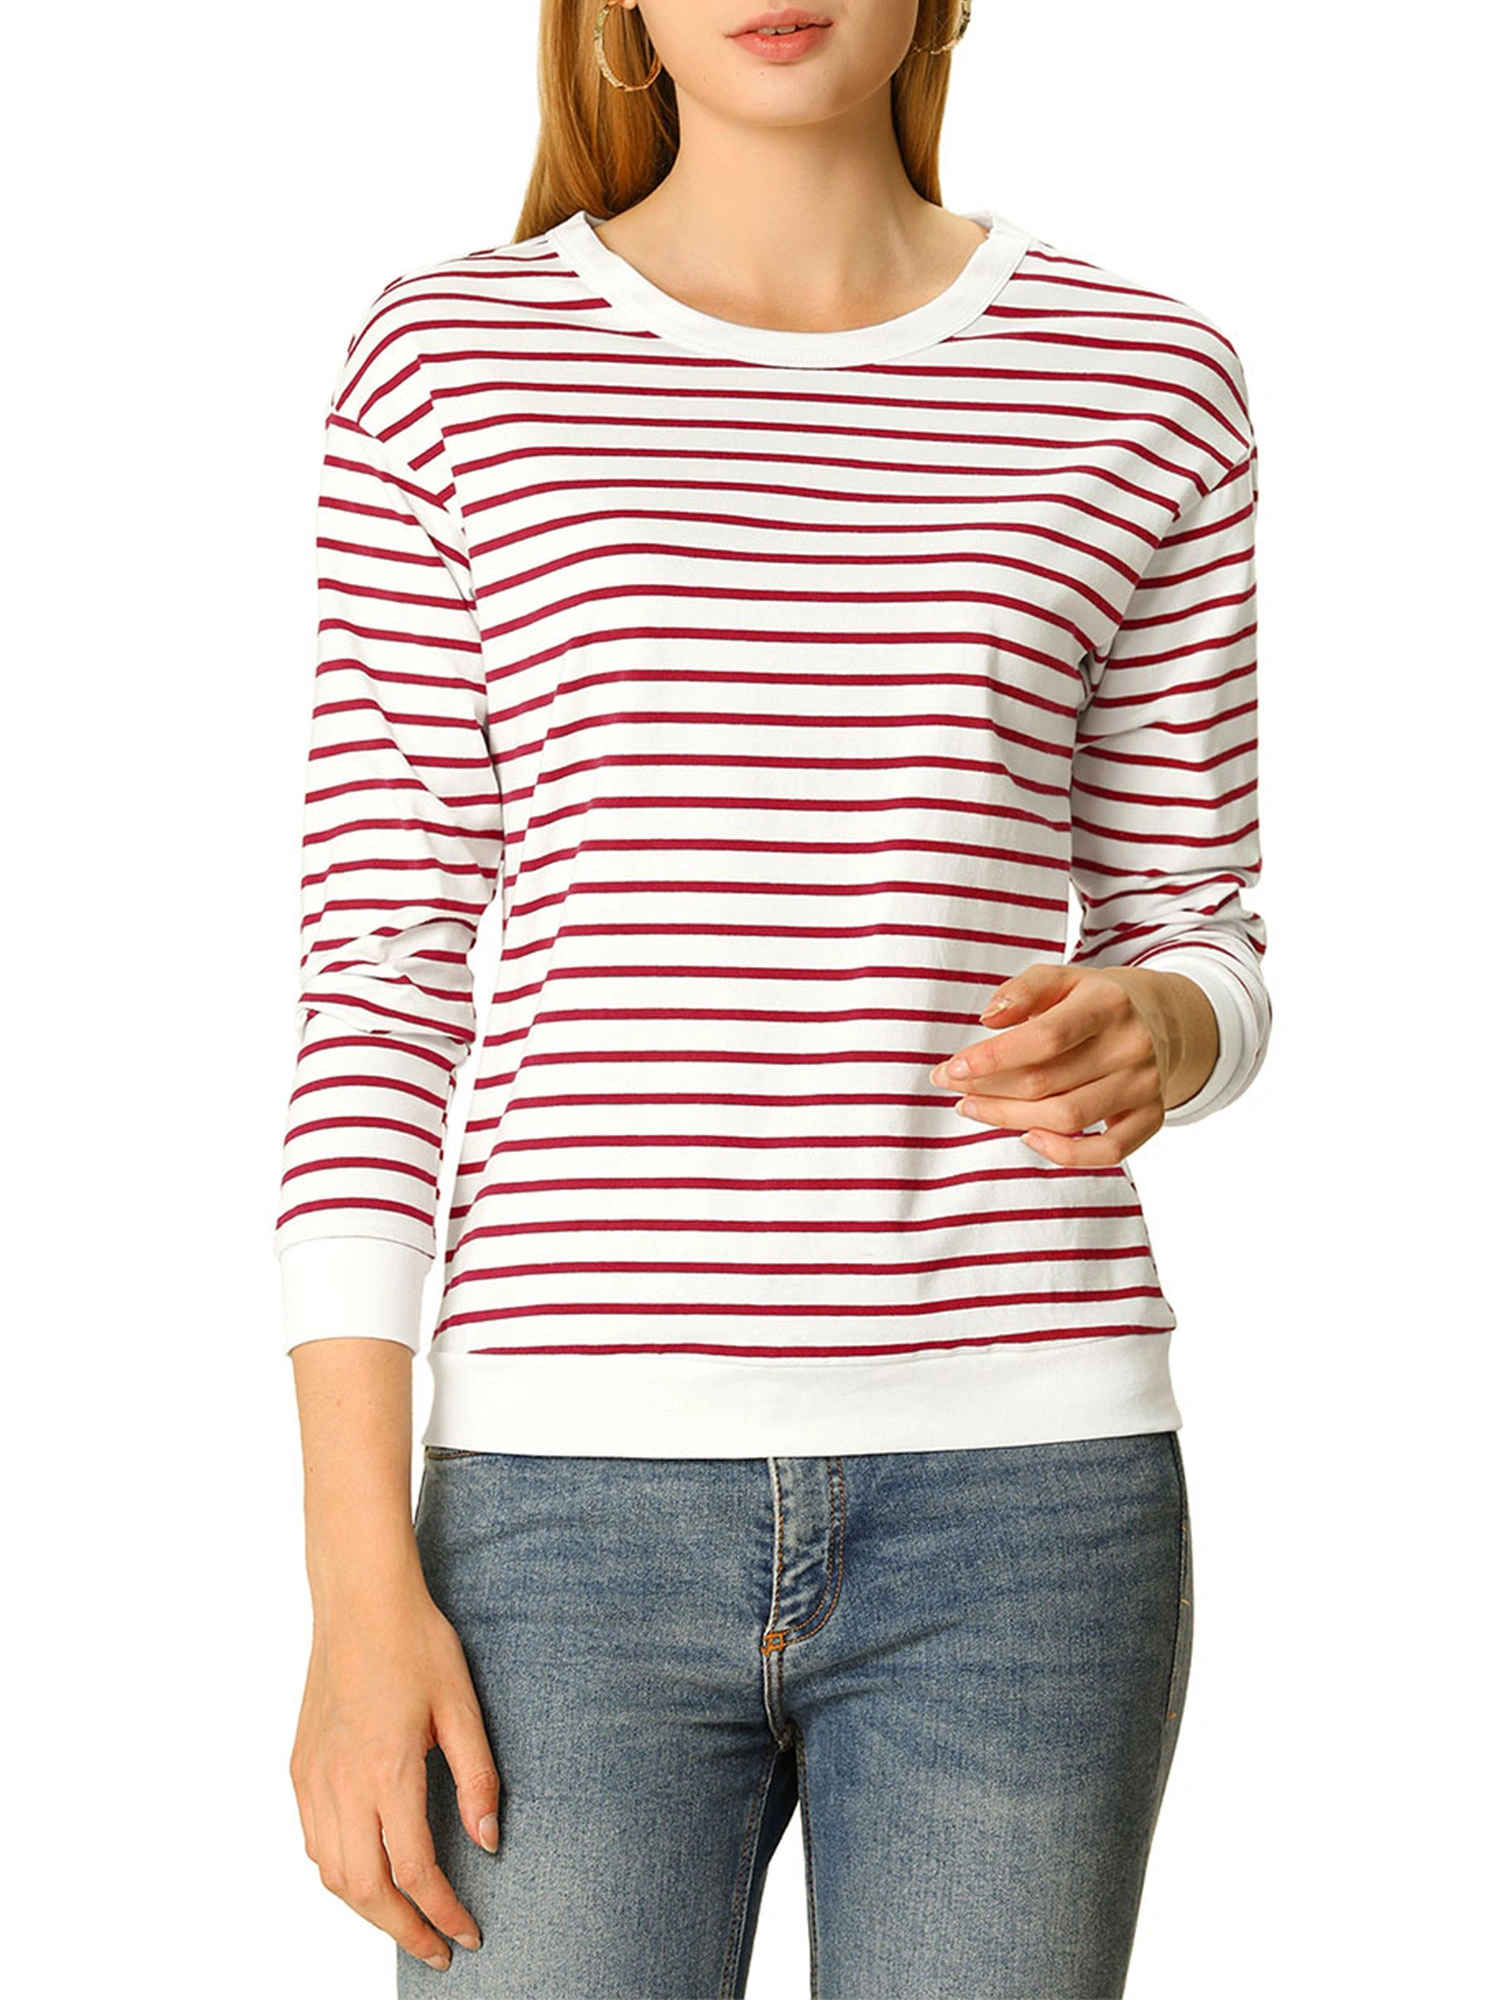 Wholesale Womens Pullover T Shirt Supplier In Denmark